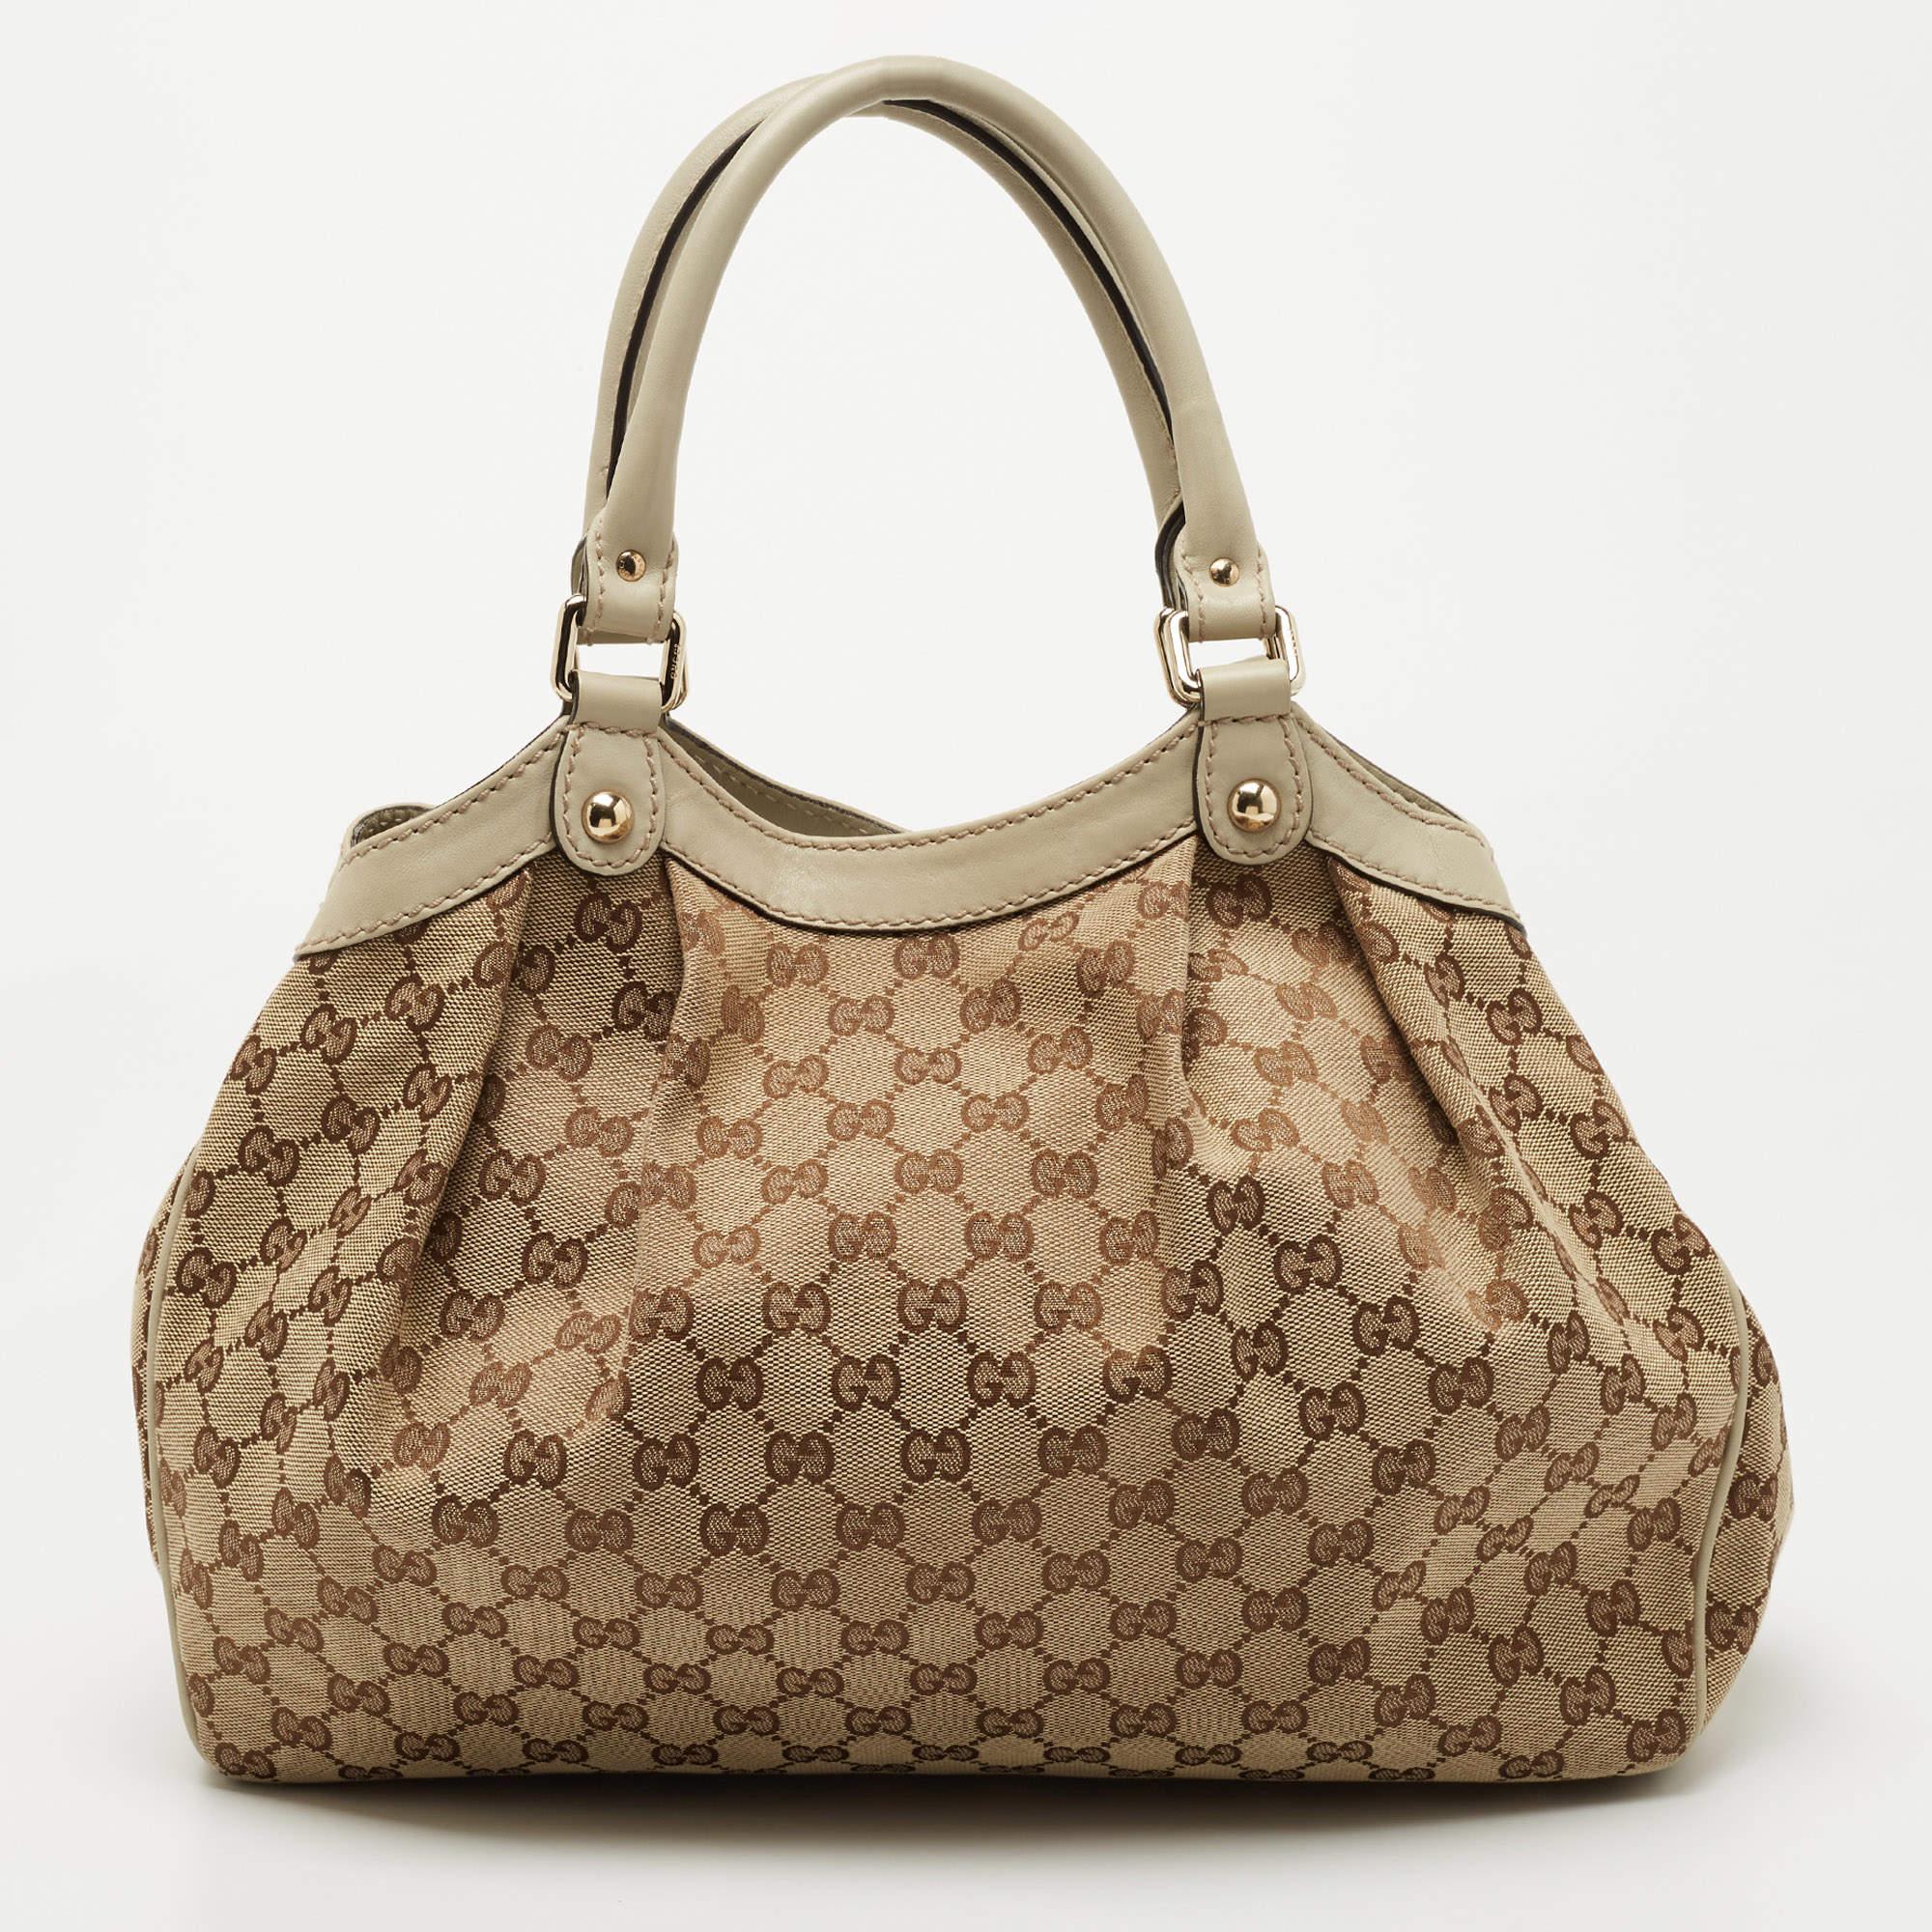 The Sukey is one of the best-selling designs from Gucci, and we believe you deserve to have one too. Crafted from GG canvas & leather and equipped with a spacious interior, this bag will work perfectly with any outfit. It is complete with two